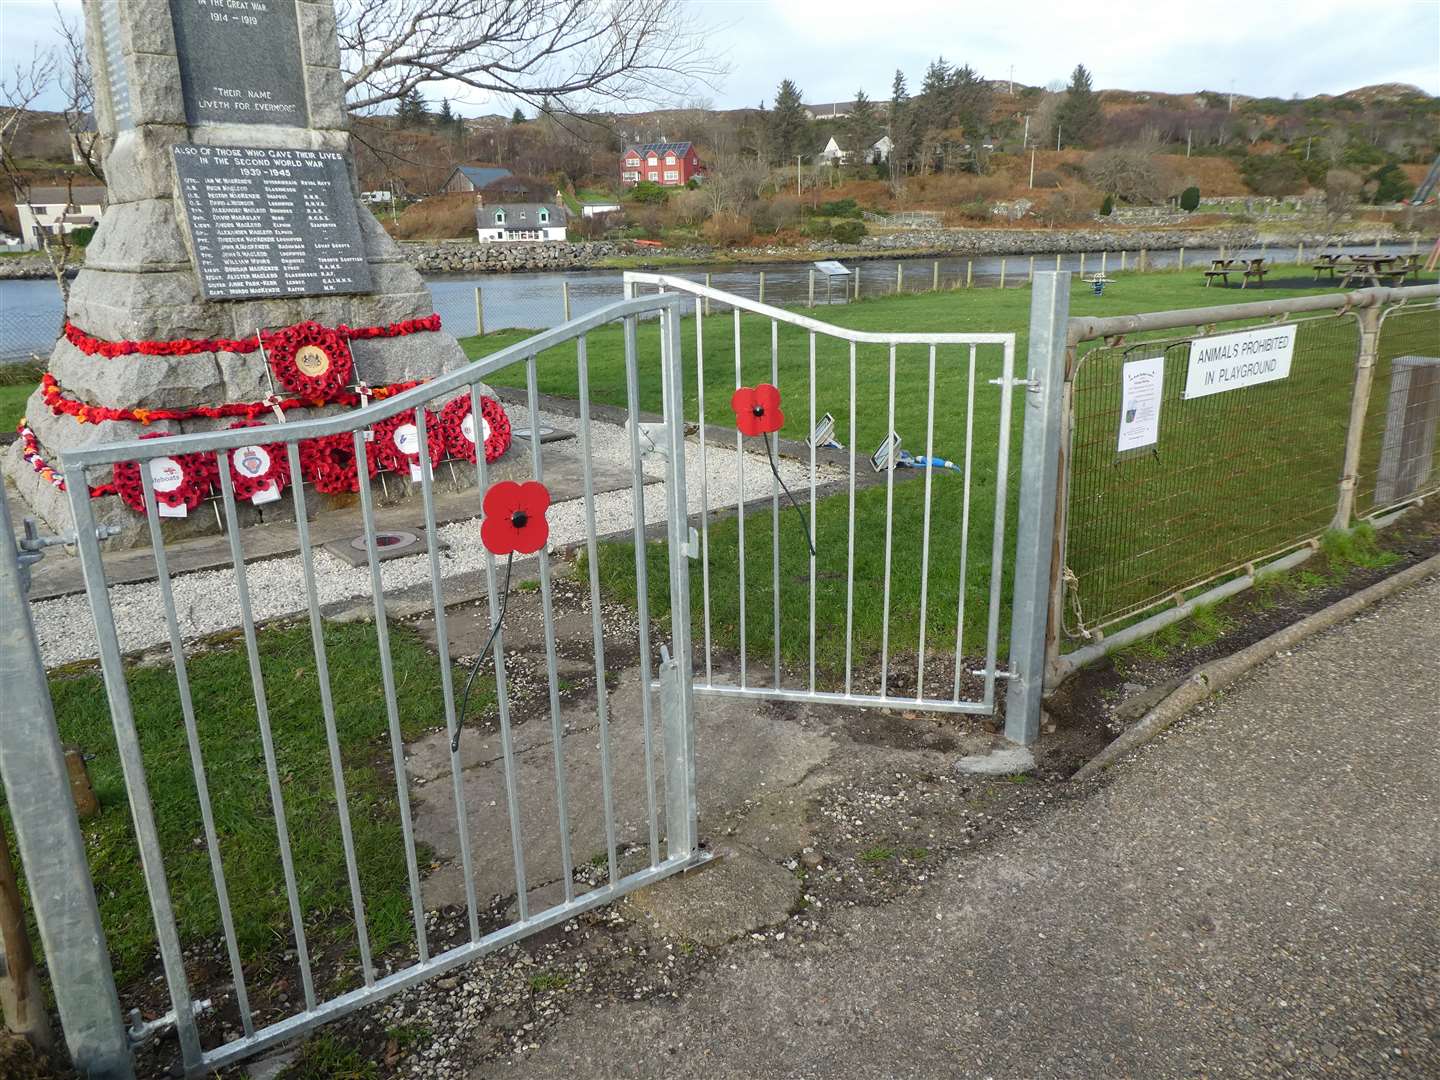 The new gates were designed by Durrant Macleod, secretary of the Assynt branch of the Royal British Legion Scotland (RBLS), and his wife Maysie.